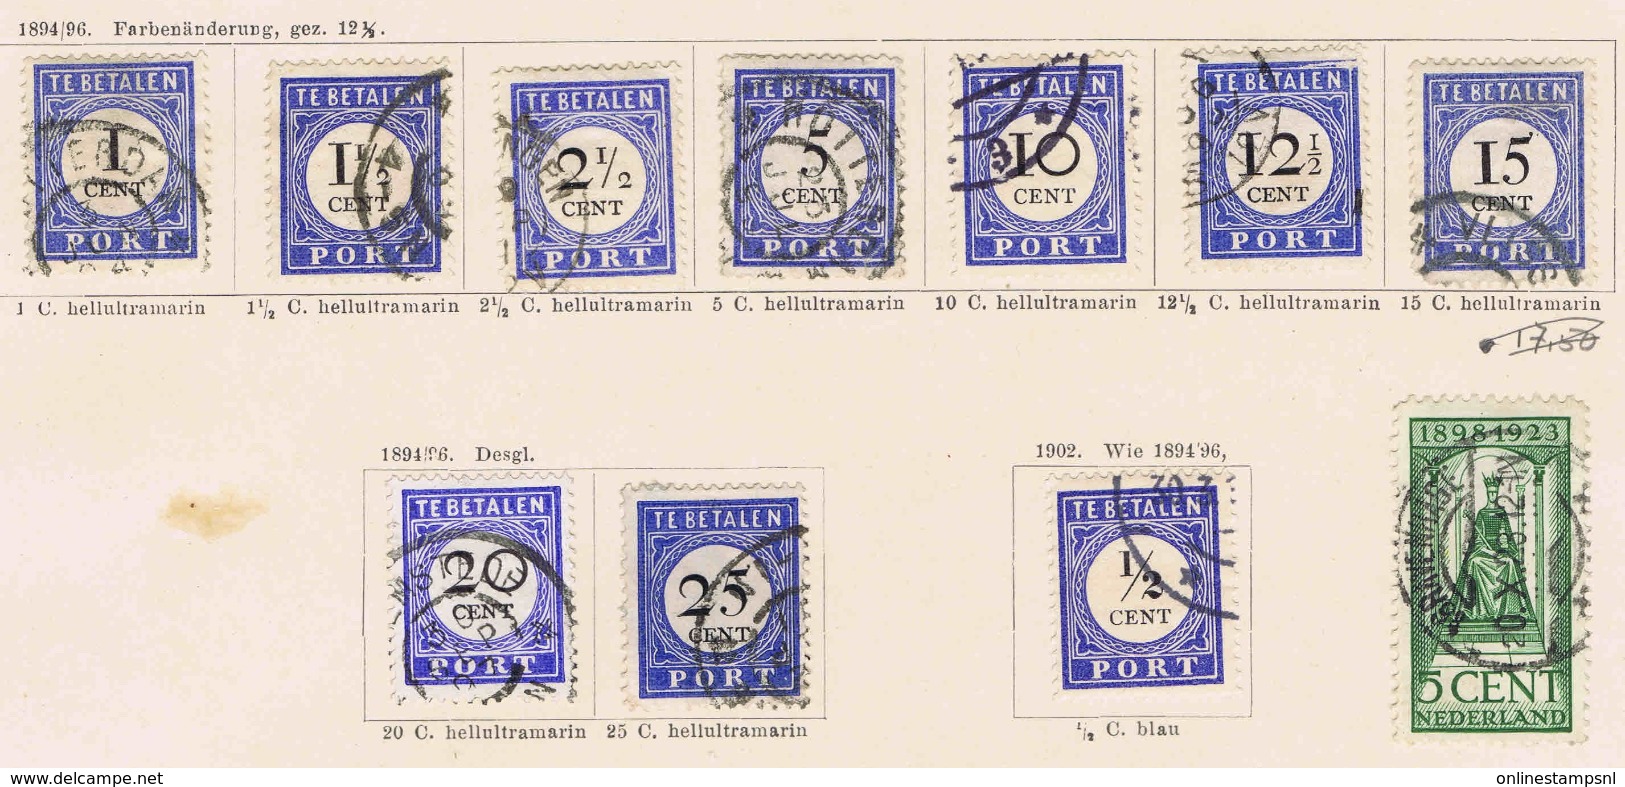 Netherlands: classic collection starts 1852 used on album pages Cat value NVPH 2017 approx. 2700 euro